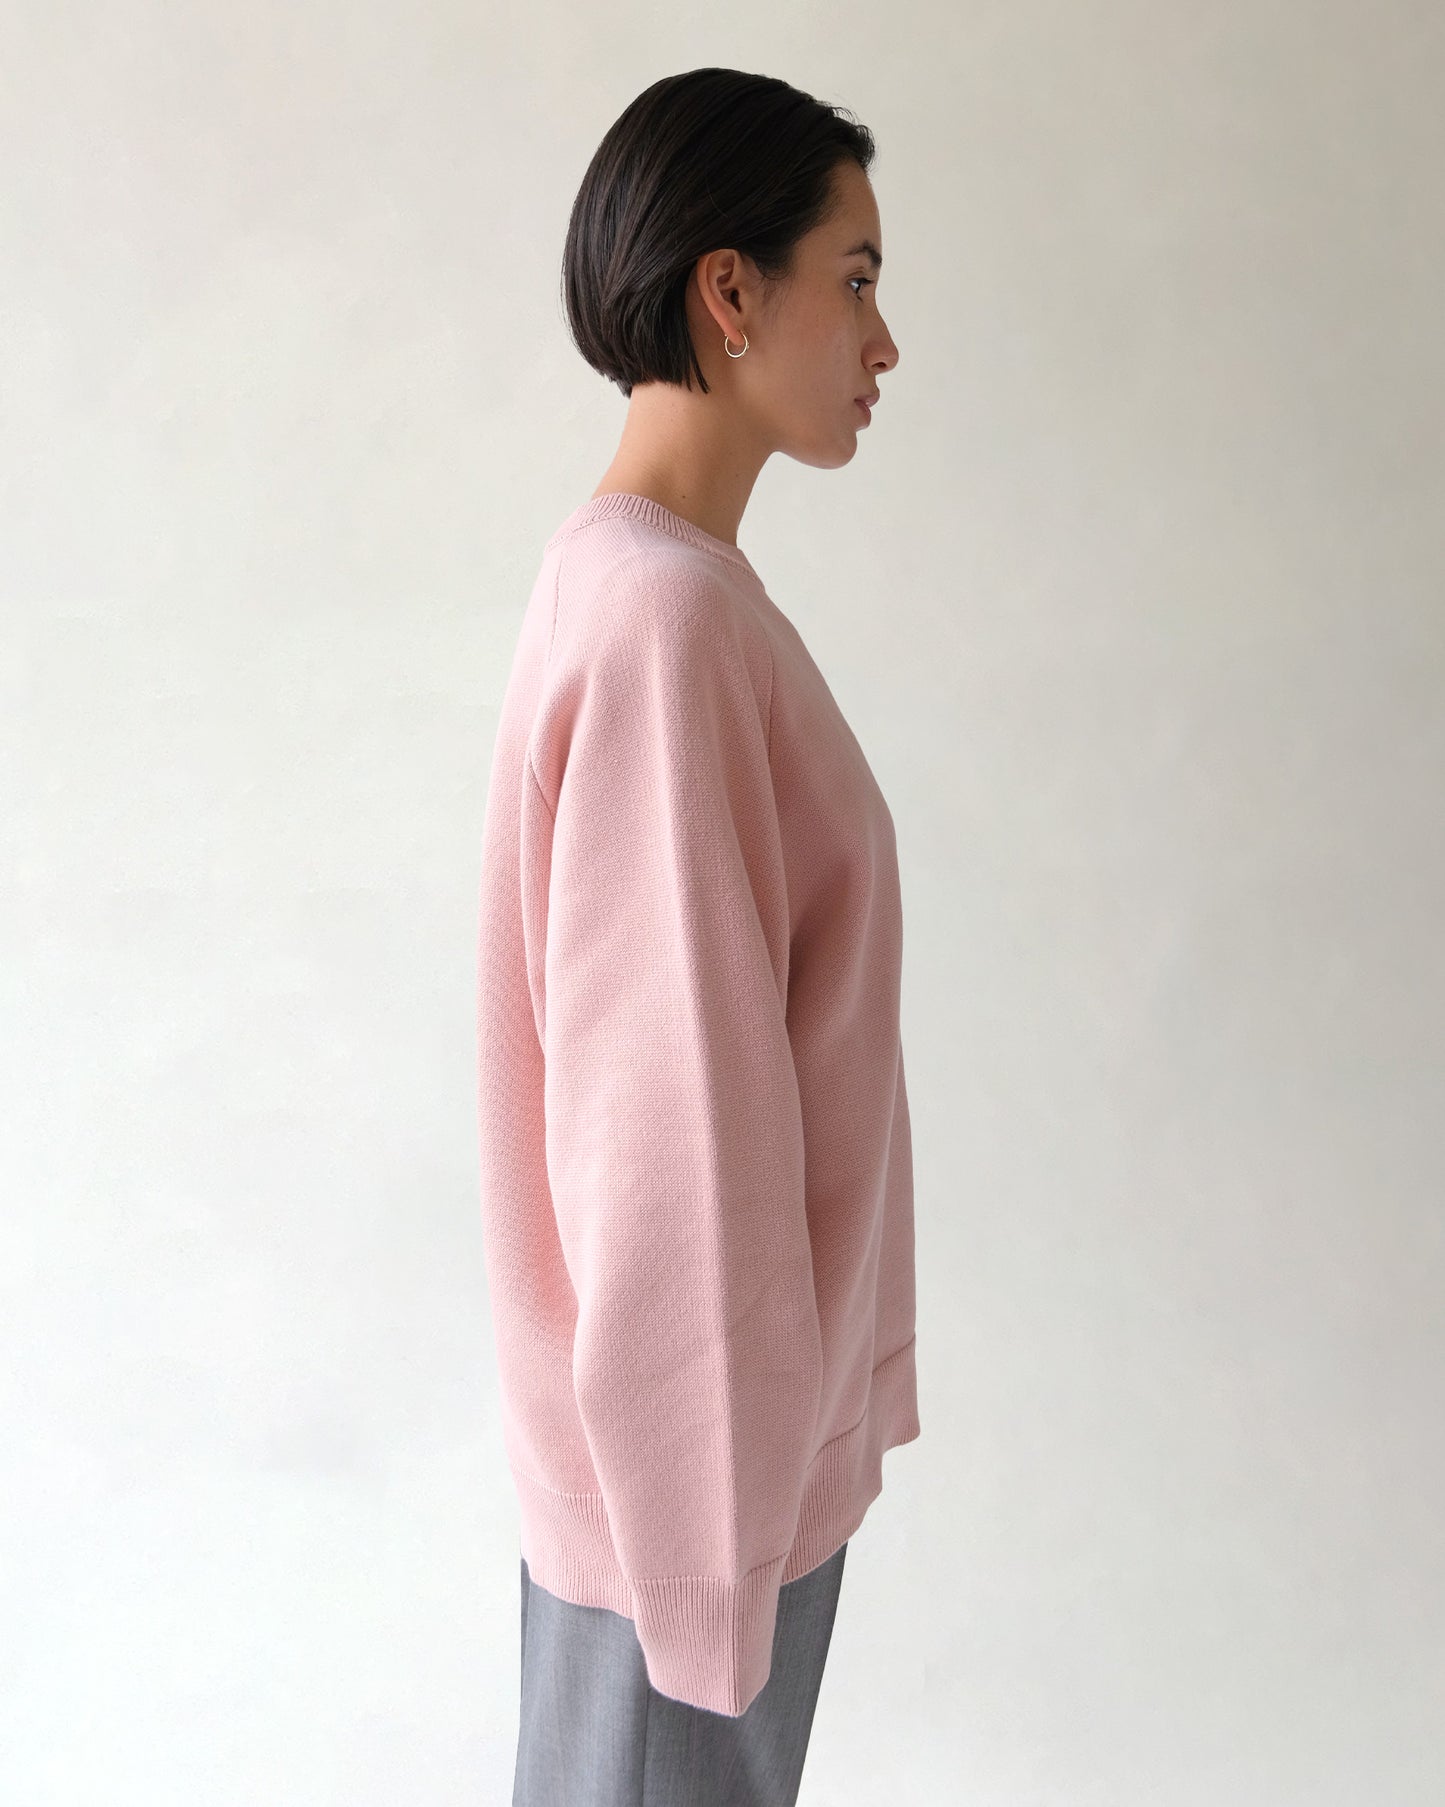 404 Paled Color Crew Neck Sweater by RYE TENDER - Pink